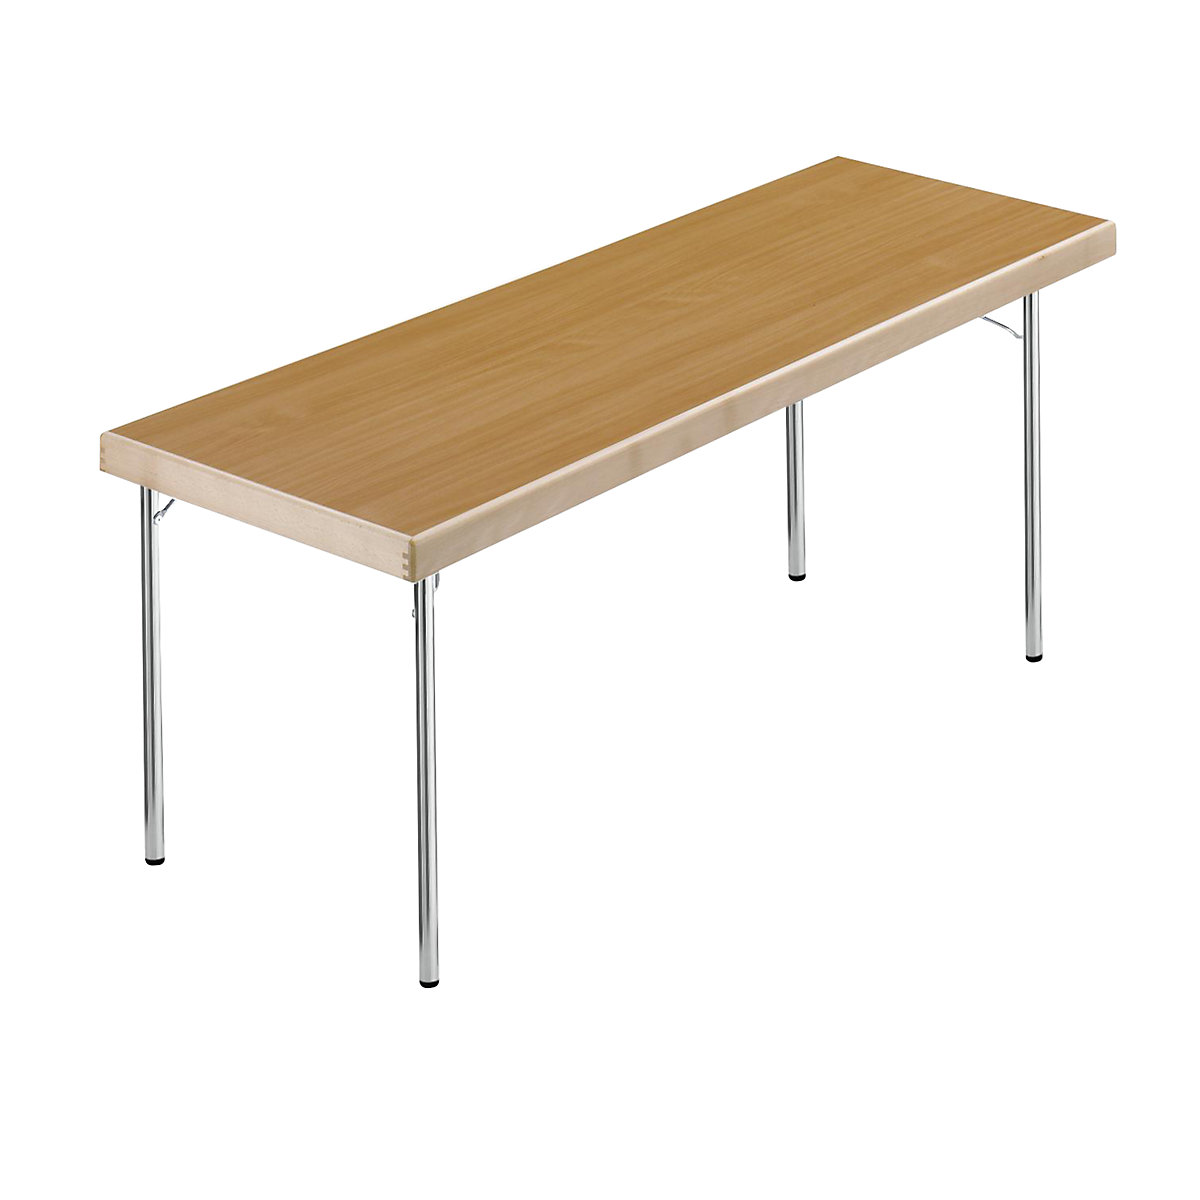 Folding table, 4-footed frame, 1700 x 700 mm, chrome plated frame, beech finish tabletop-12